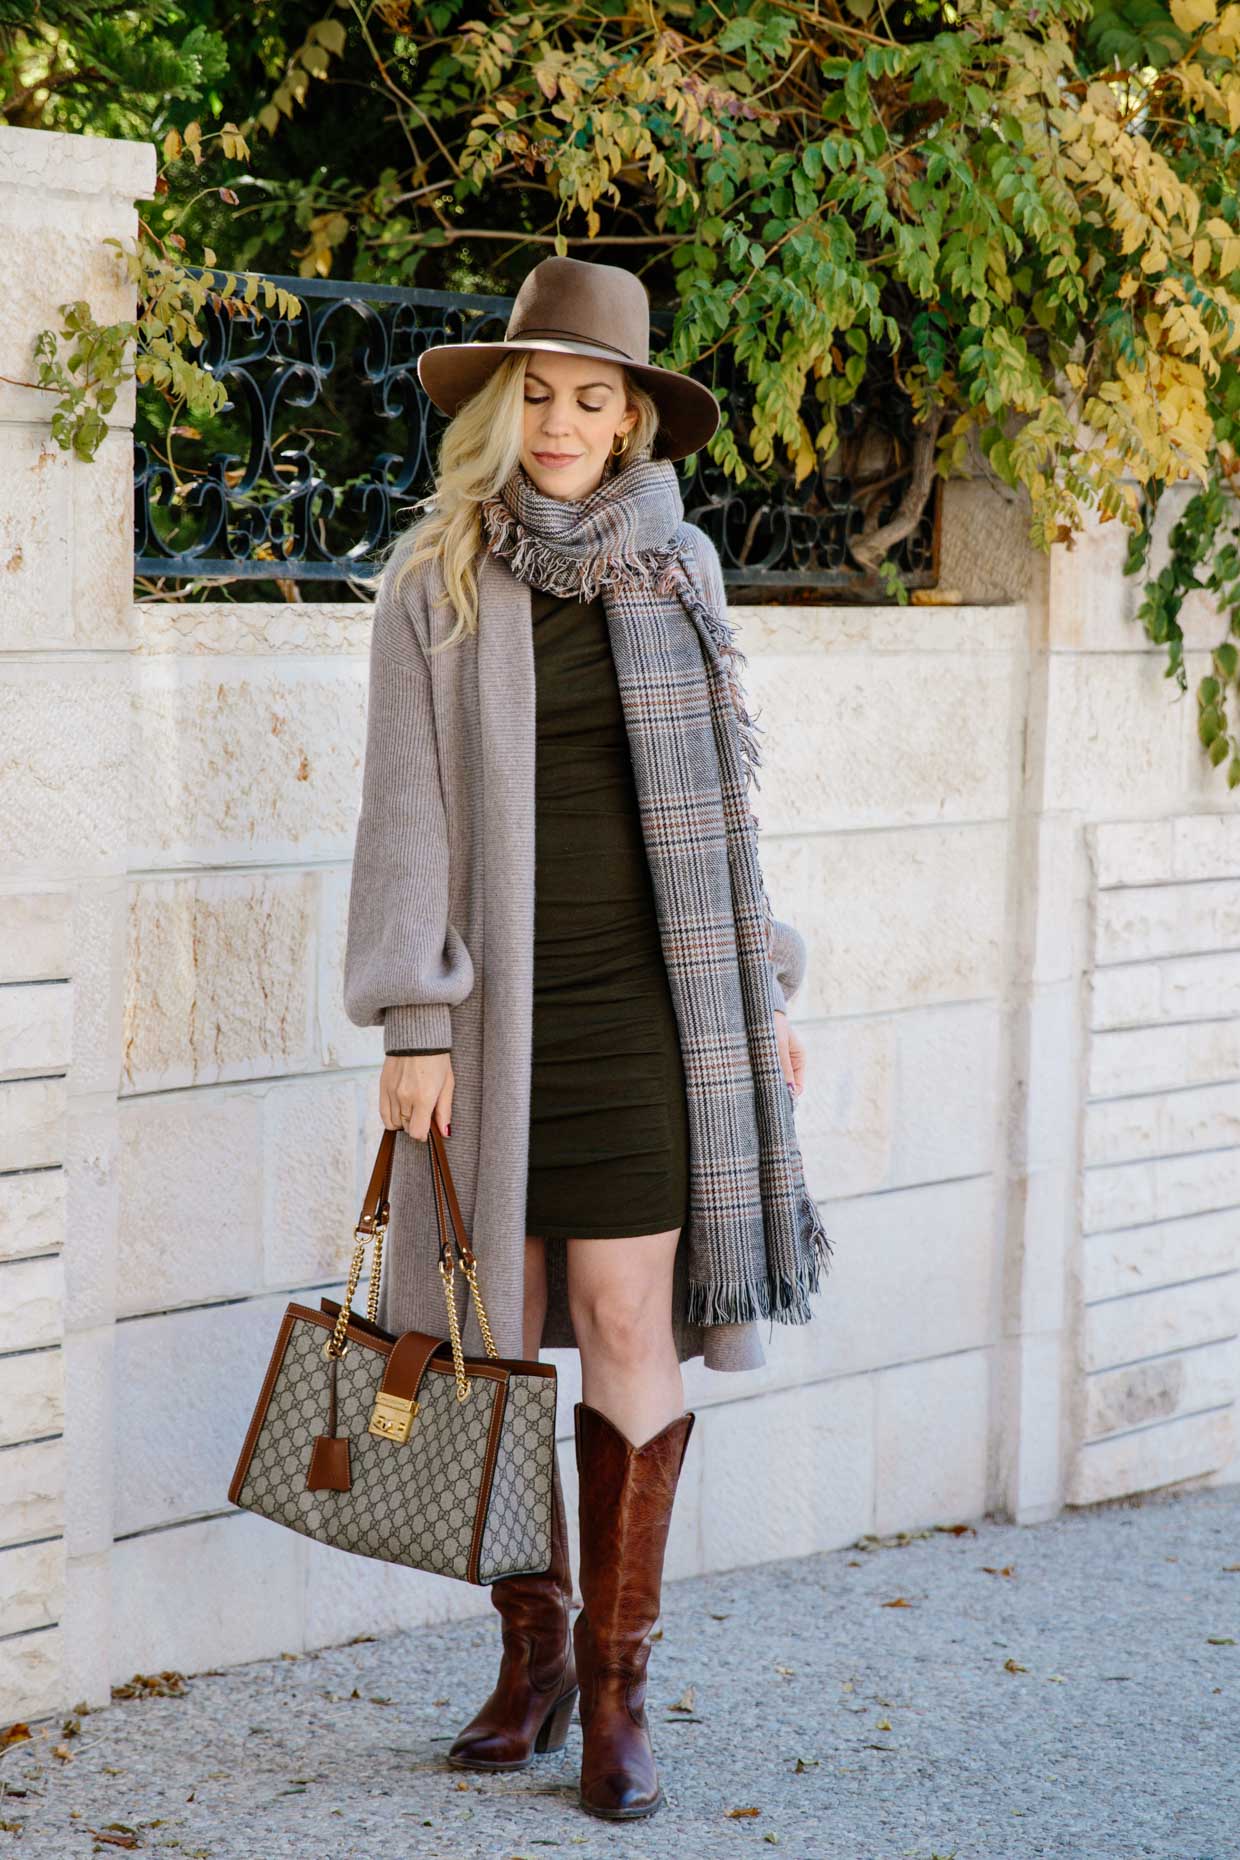 Thanksgiving Outfit Ideas for Casual or Formal Celebrations